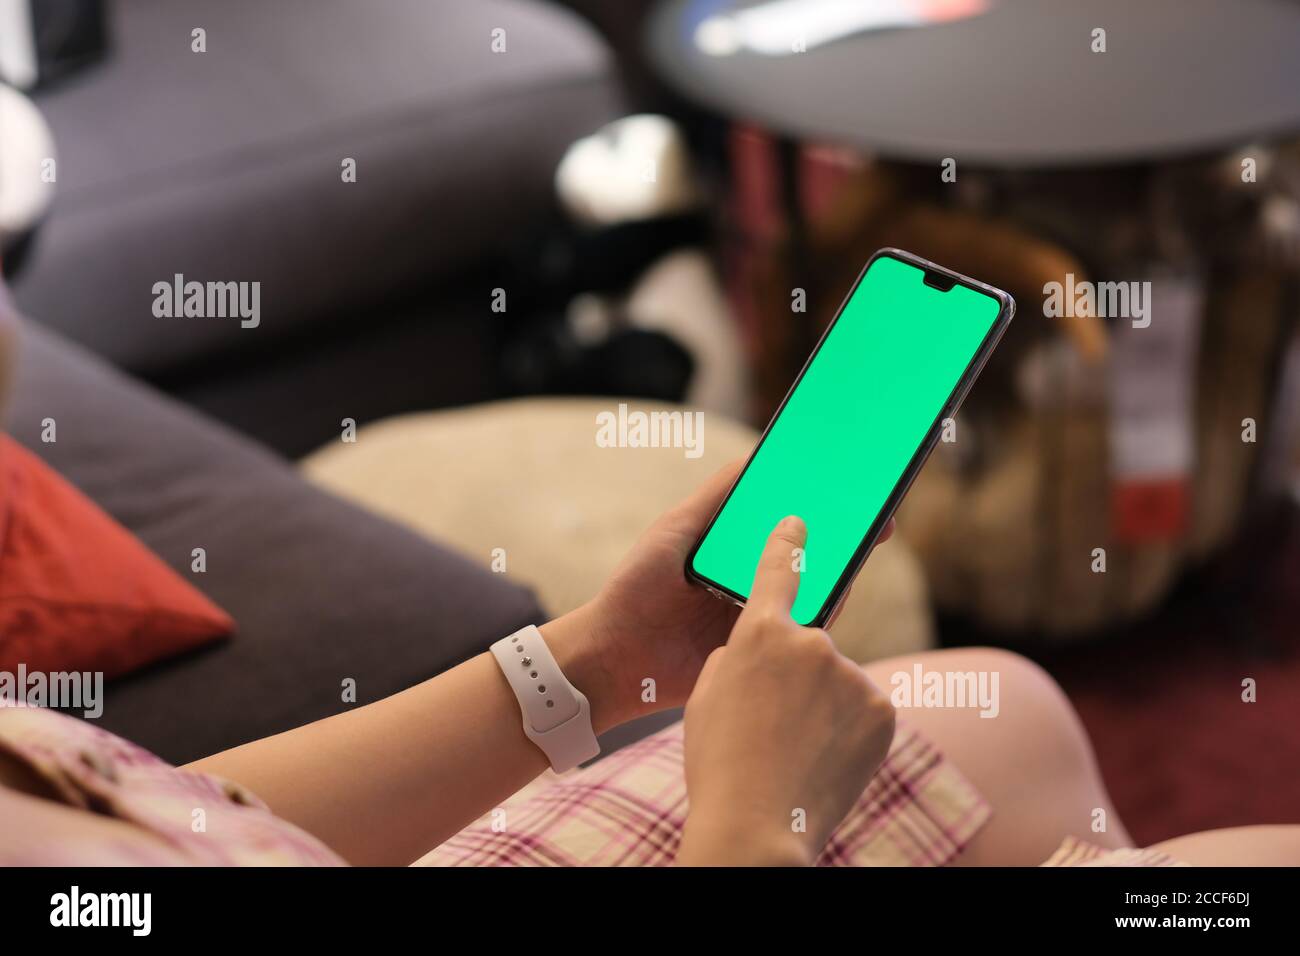 over shoulder view of people touching green screen phone at home. blur background Stock Photo